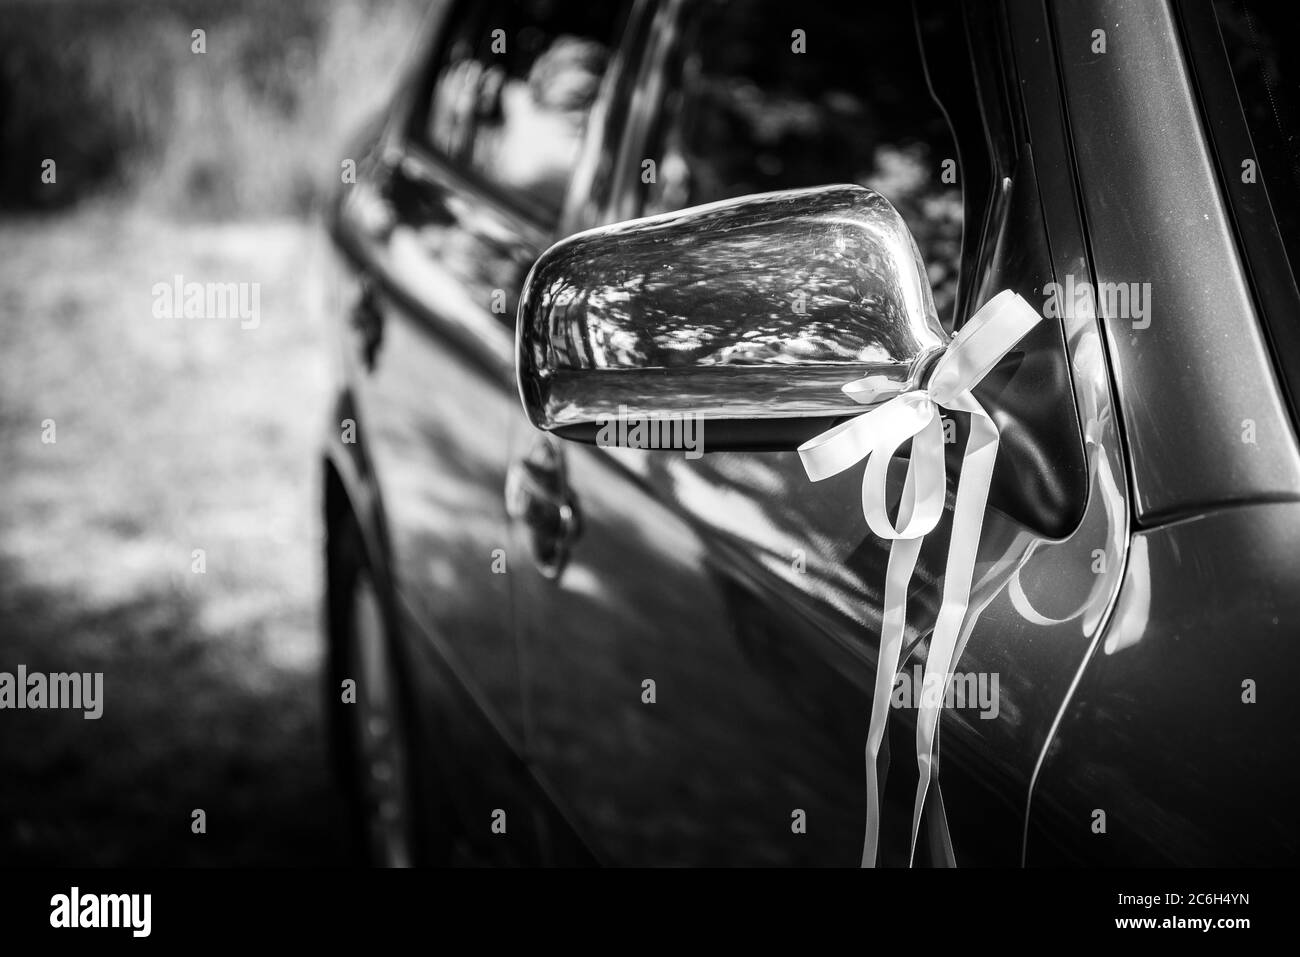 Mirror of wedding car decorated with ribbon. Black and white photo. Selective focus. Shallow DOF Stock Photo